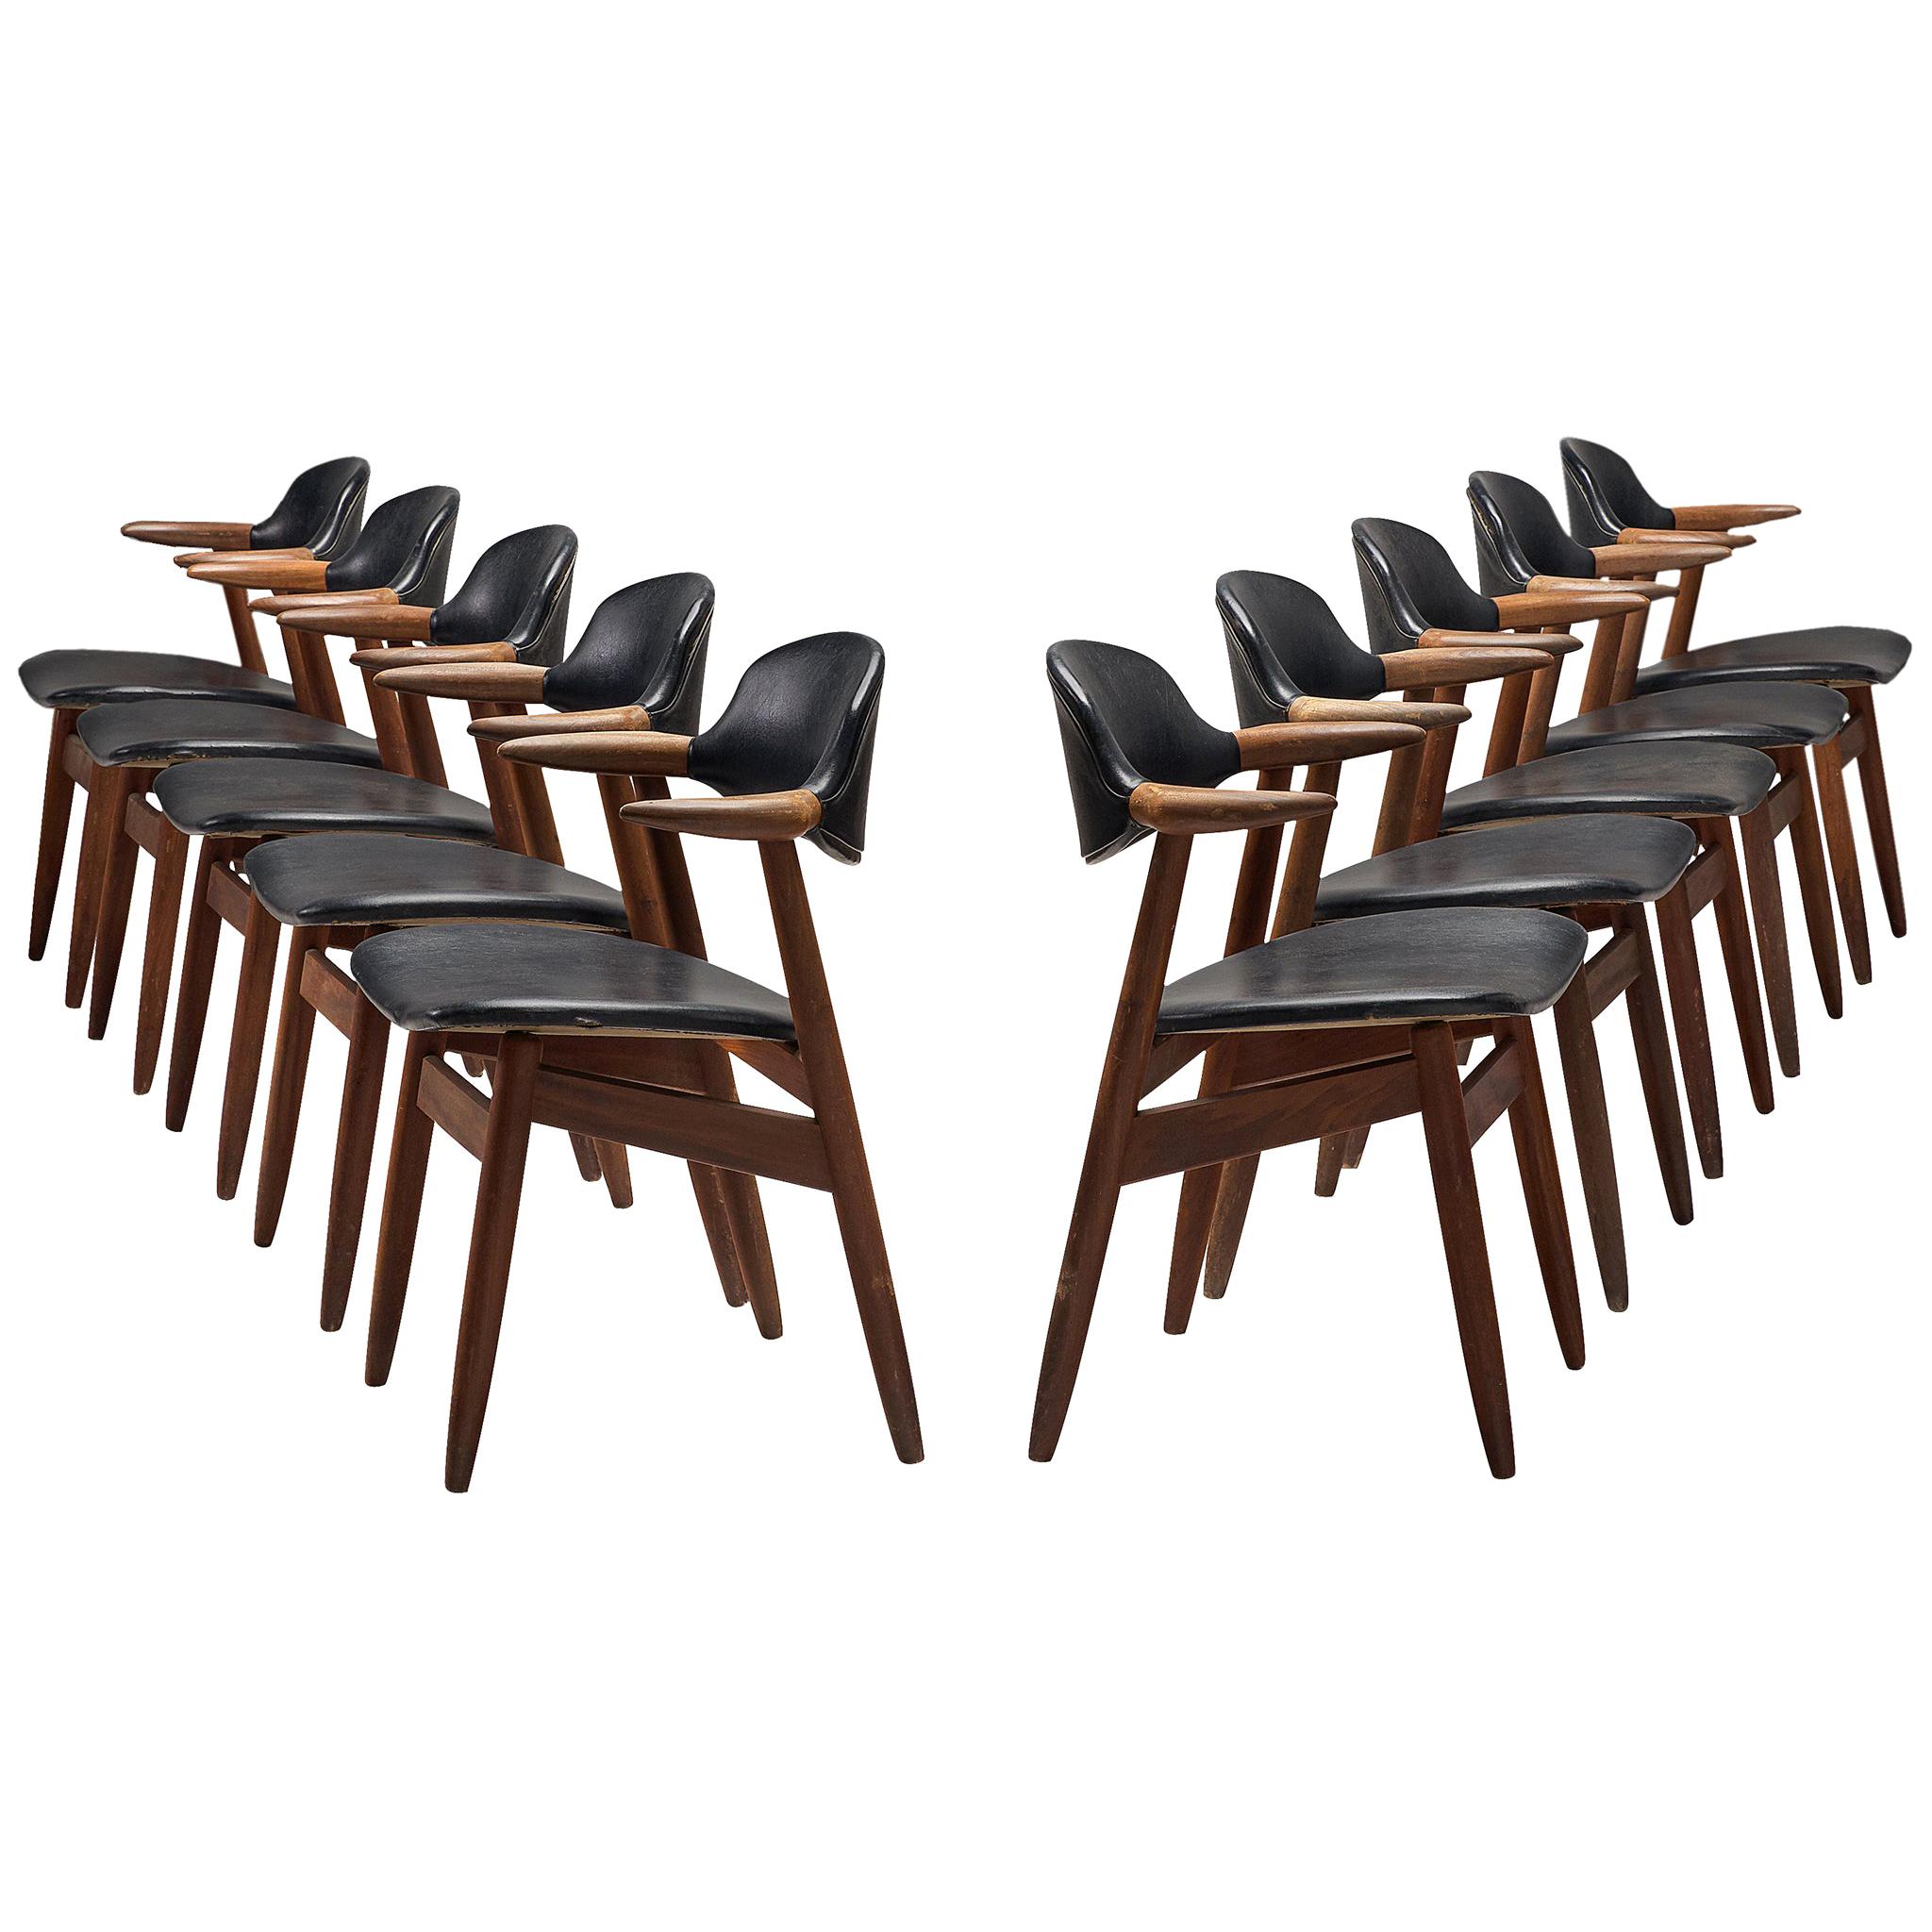 Large Set of Ten Bullhorn Chairs in Teak and Black Leather